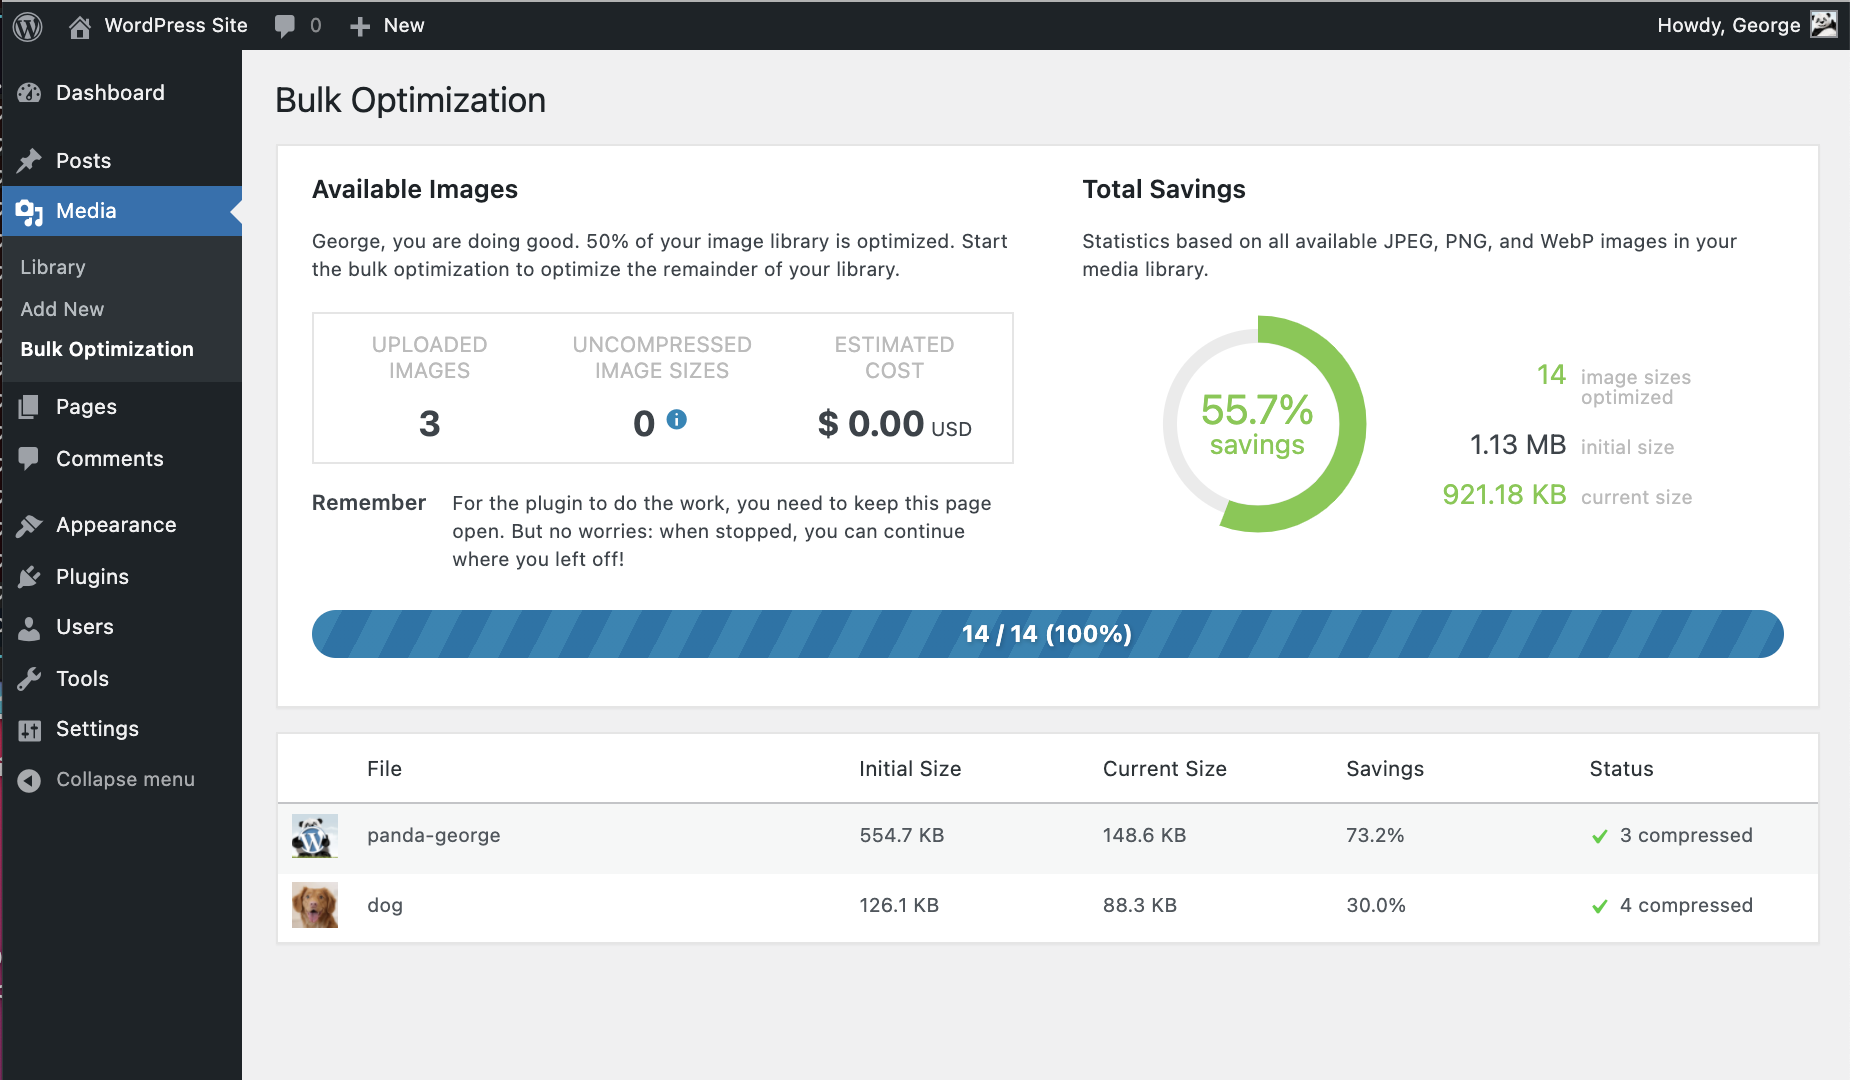 Last but not least you can also use Bulk Optimization to optimize your entire WordPress site.